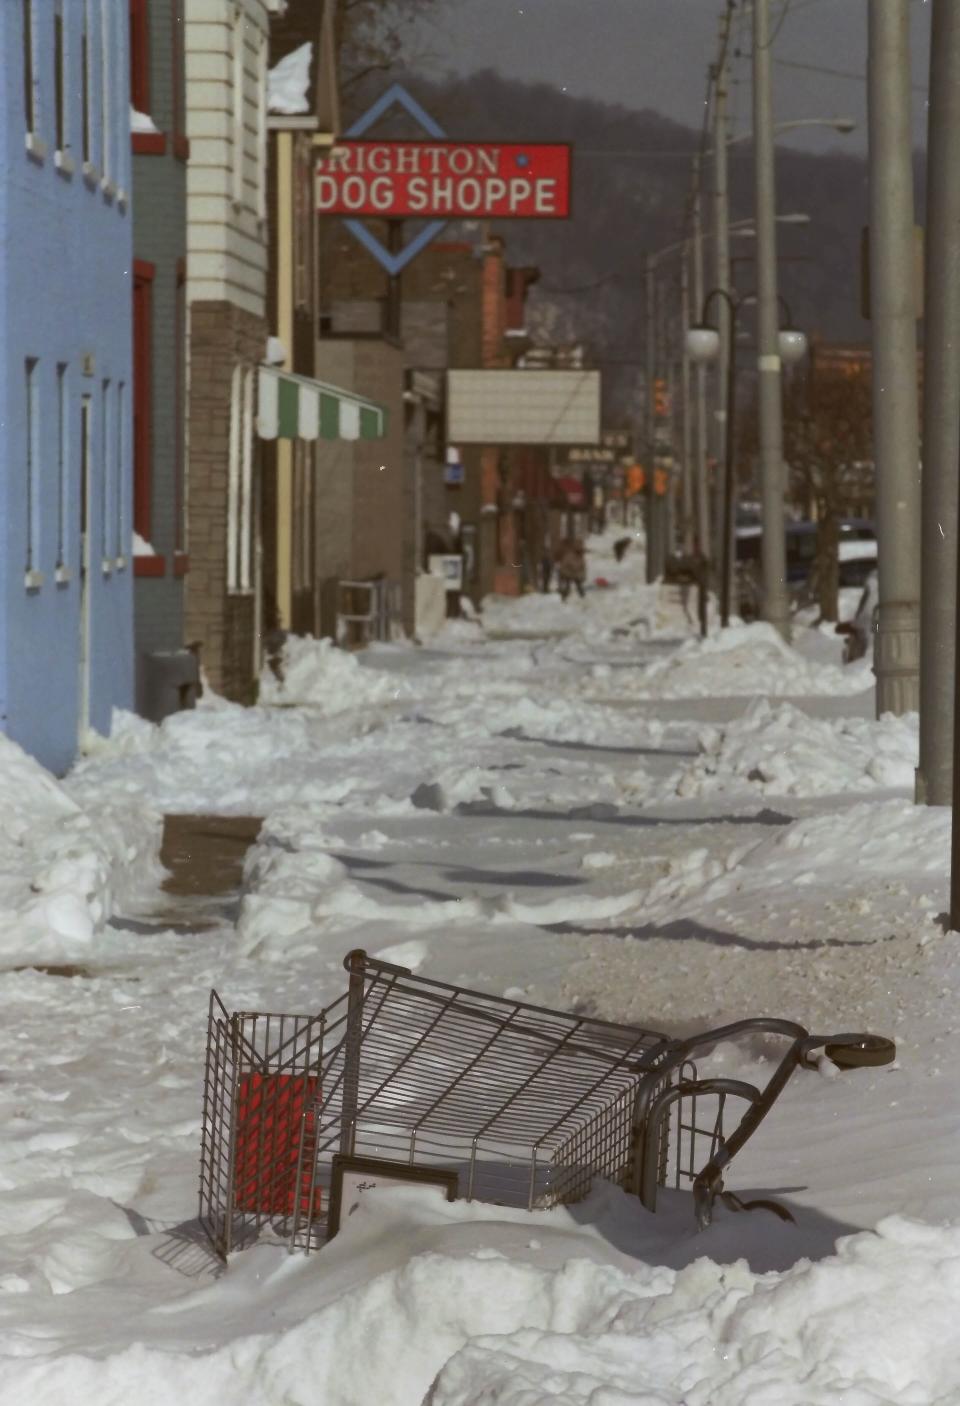 A shopping cart was abandoned in a snow bank during the Blizzard of 1993.